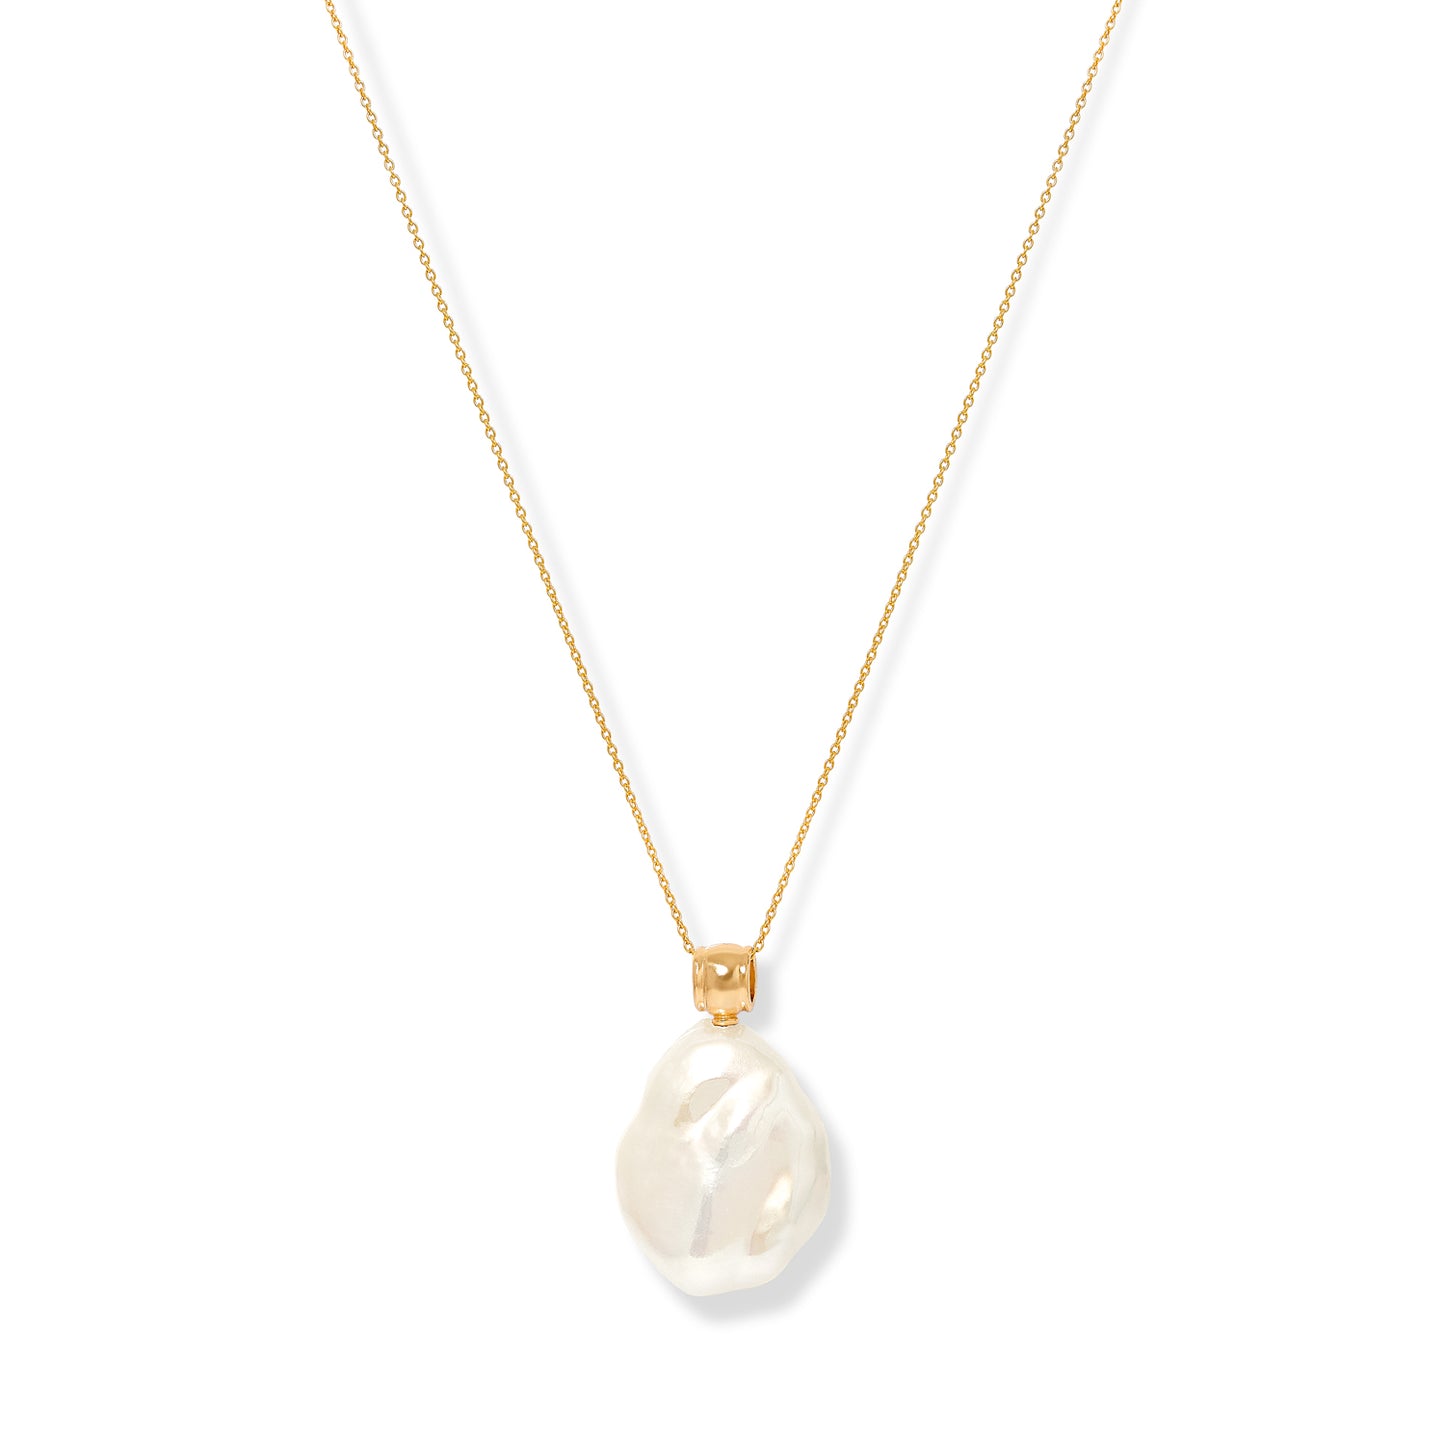 Decus large keishi pearl pendant on fine gold plated sterling silver chain